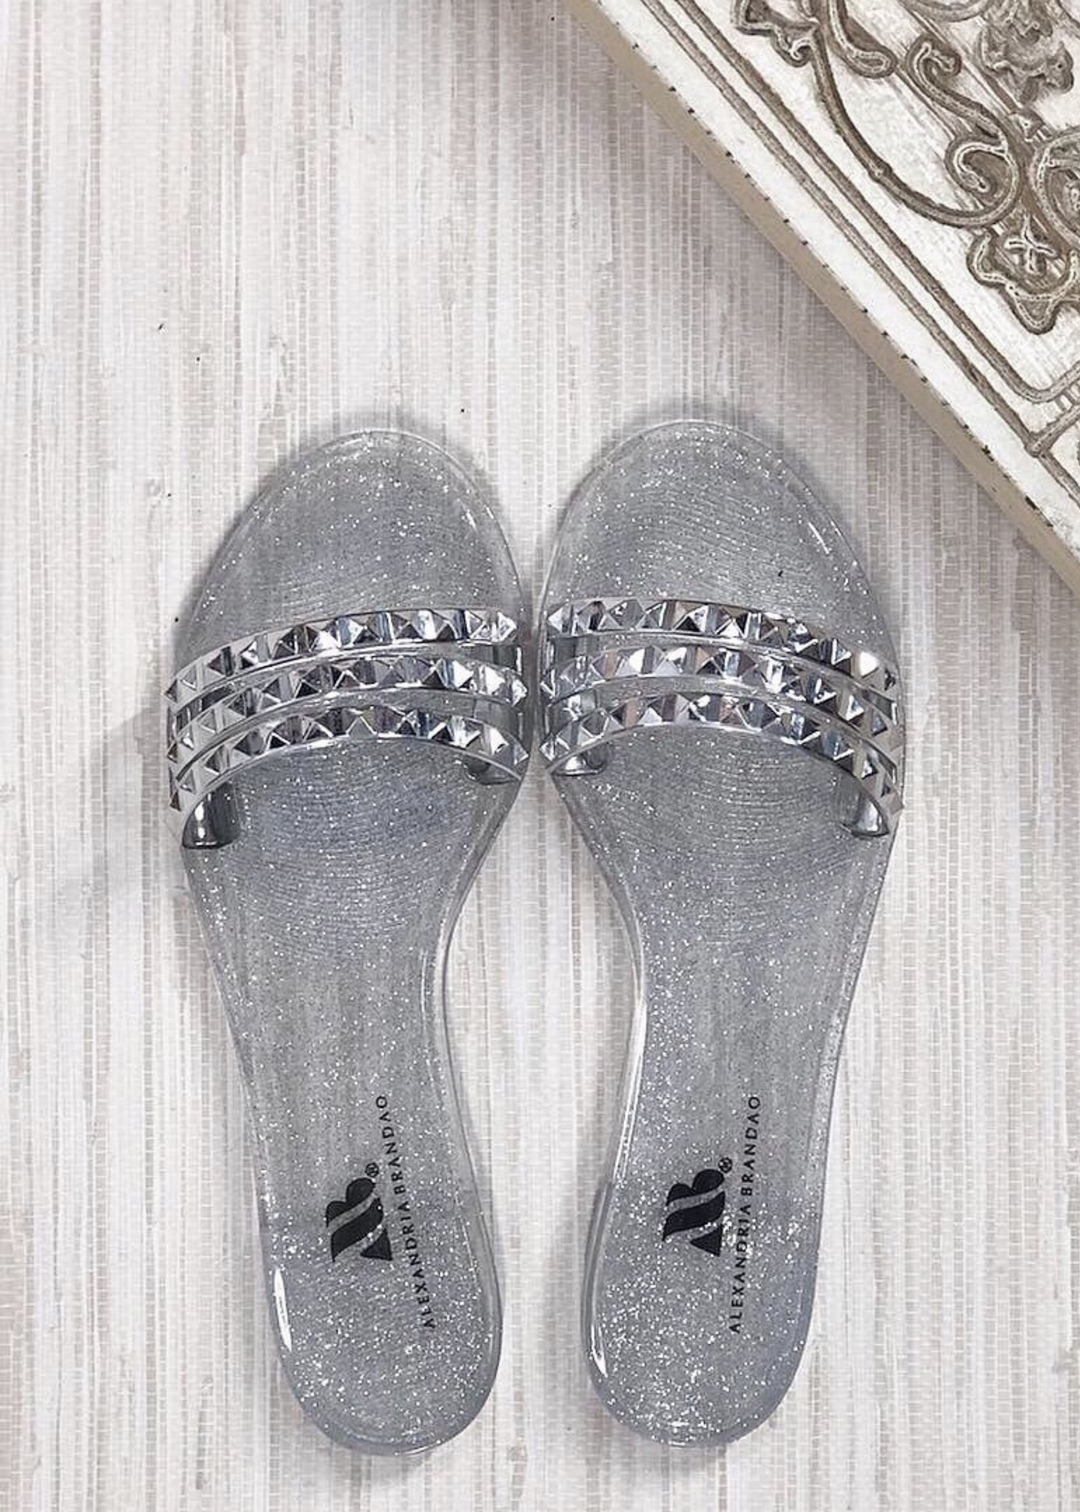 Aria B silver jelly slide sandal with three studded straps across the toes.